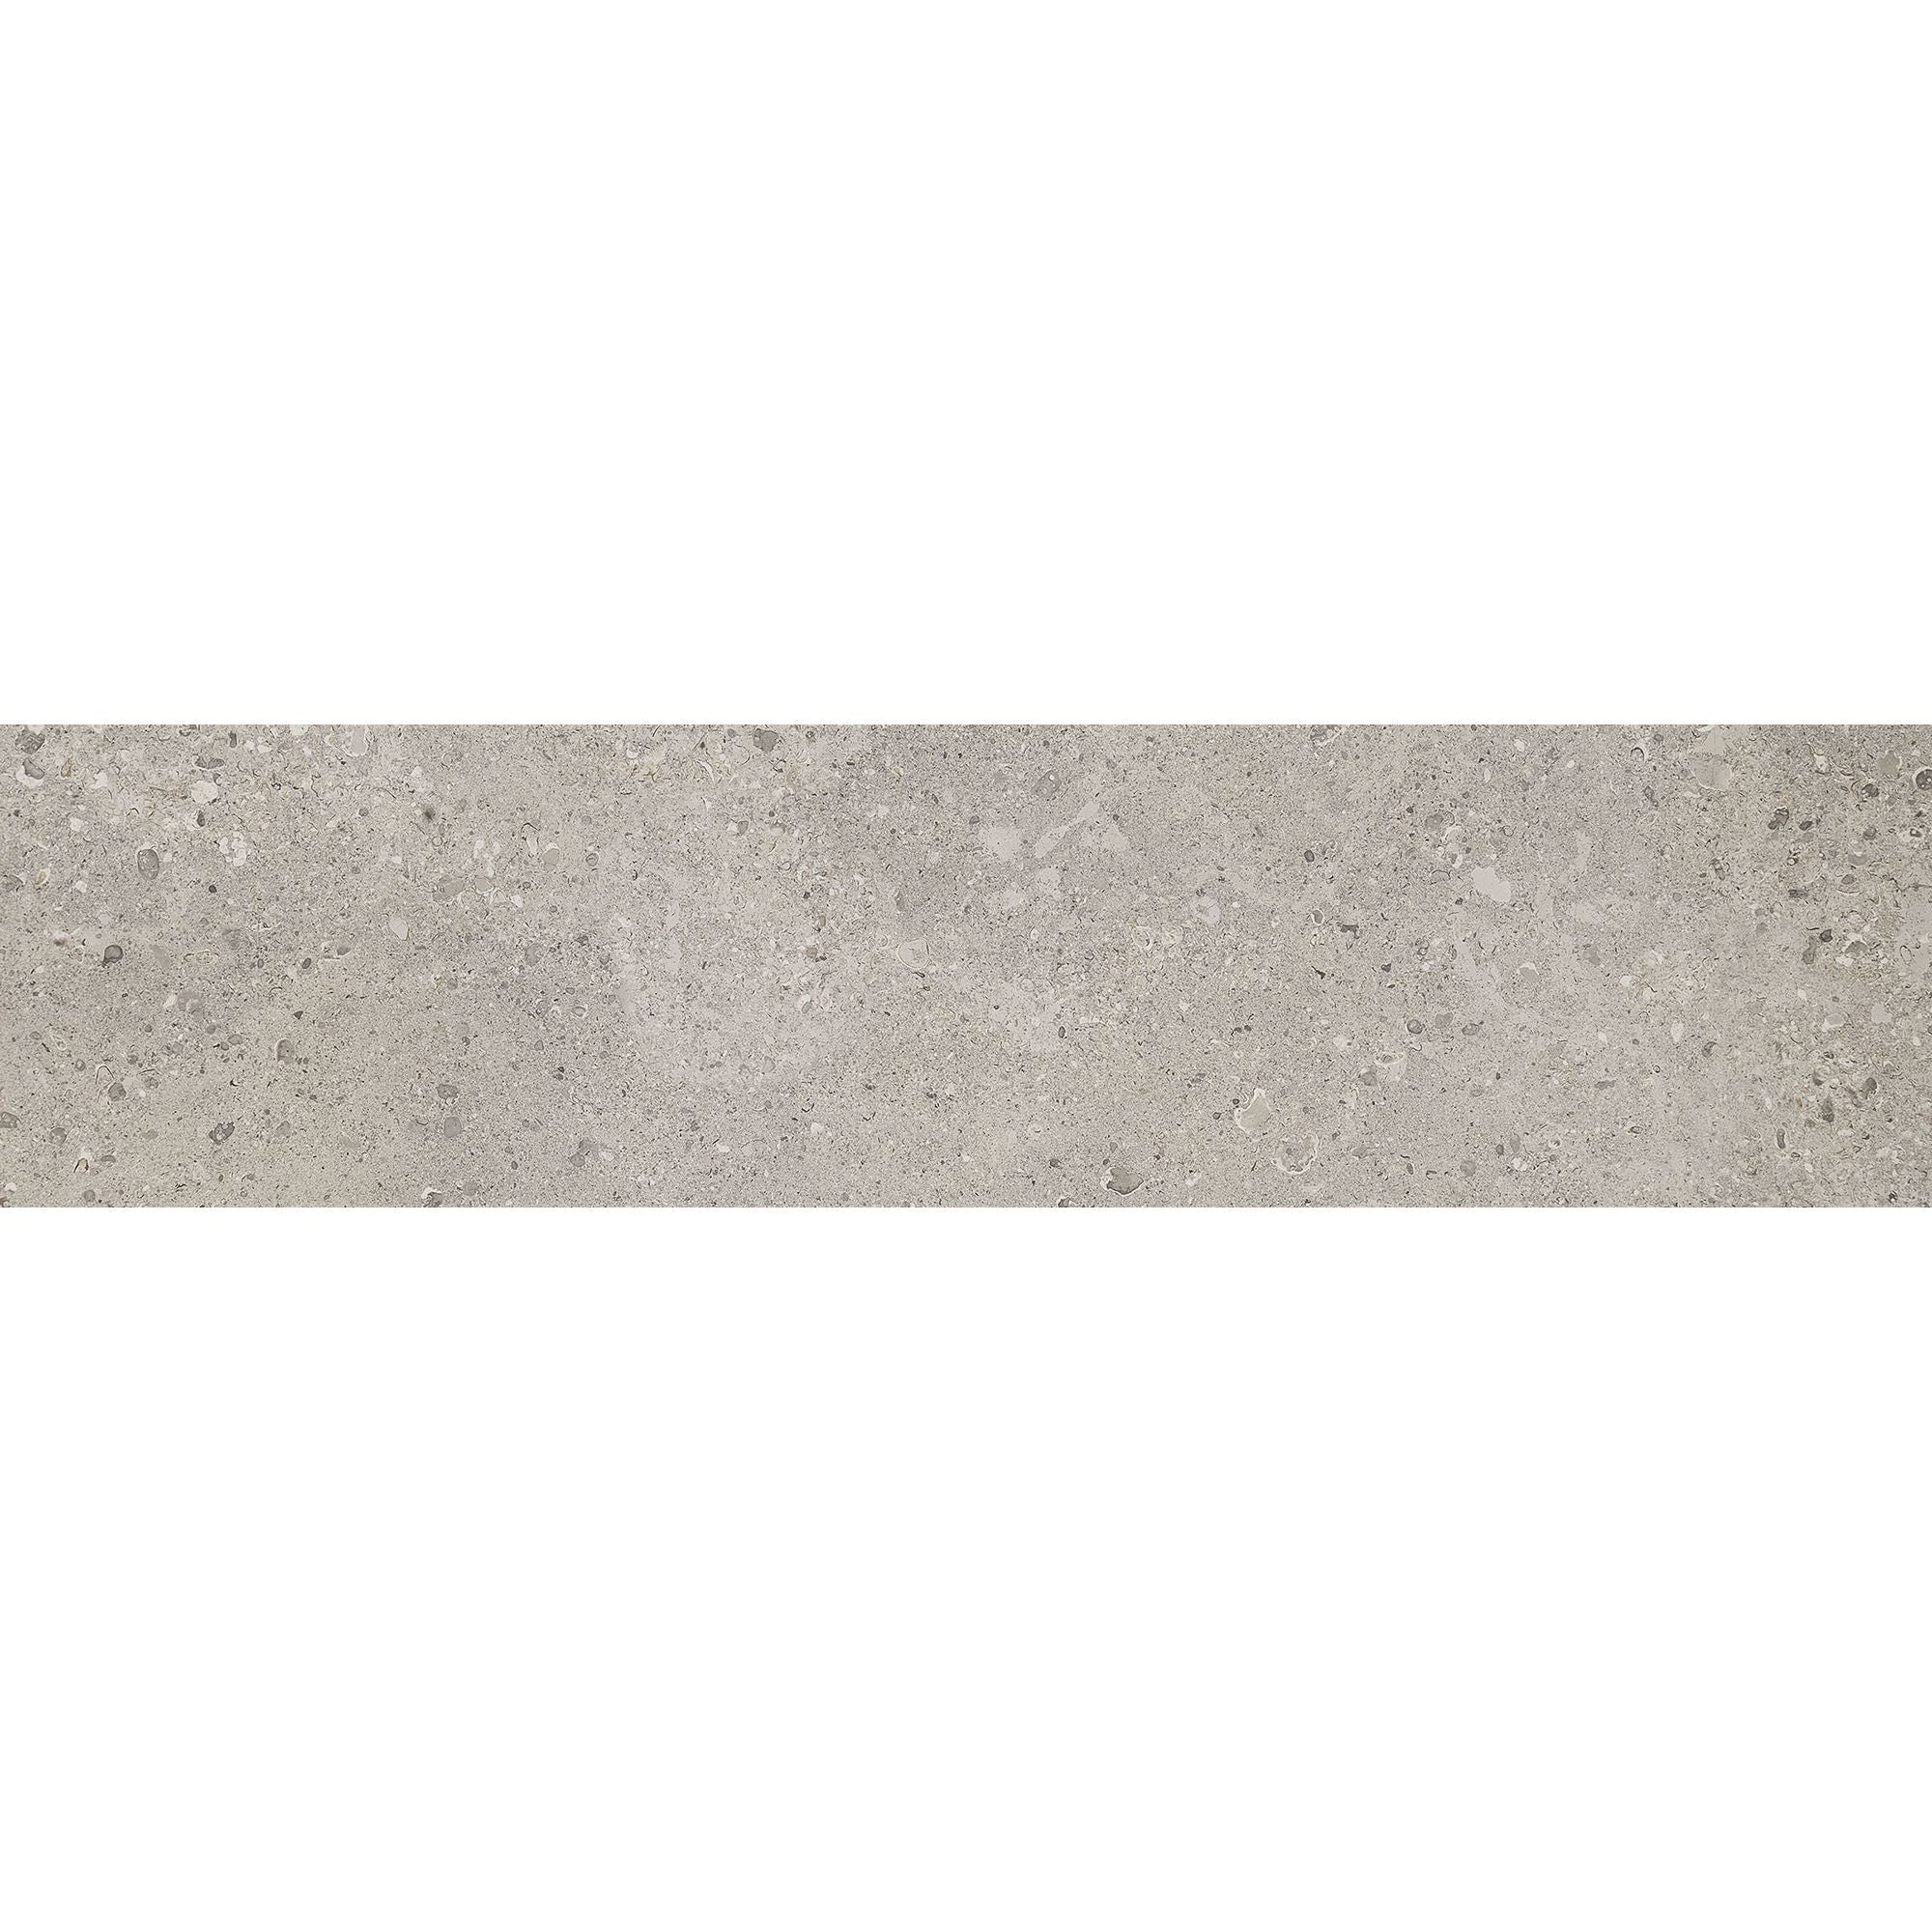 Daltile - Dignitary 6 in. x 24 in. Matte Porcelain Tile - Superior Taupe